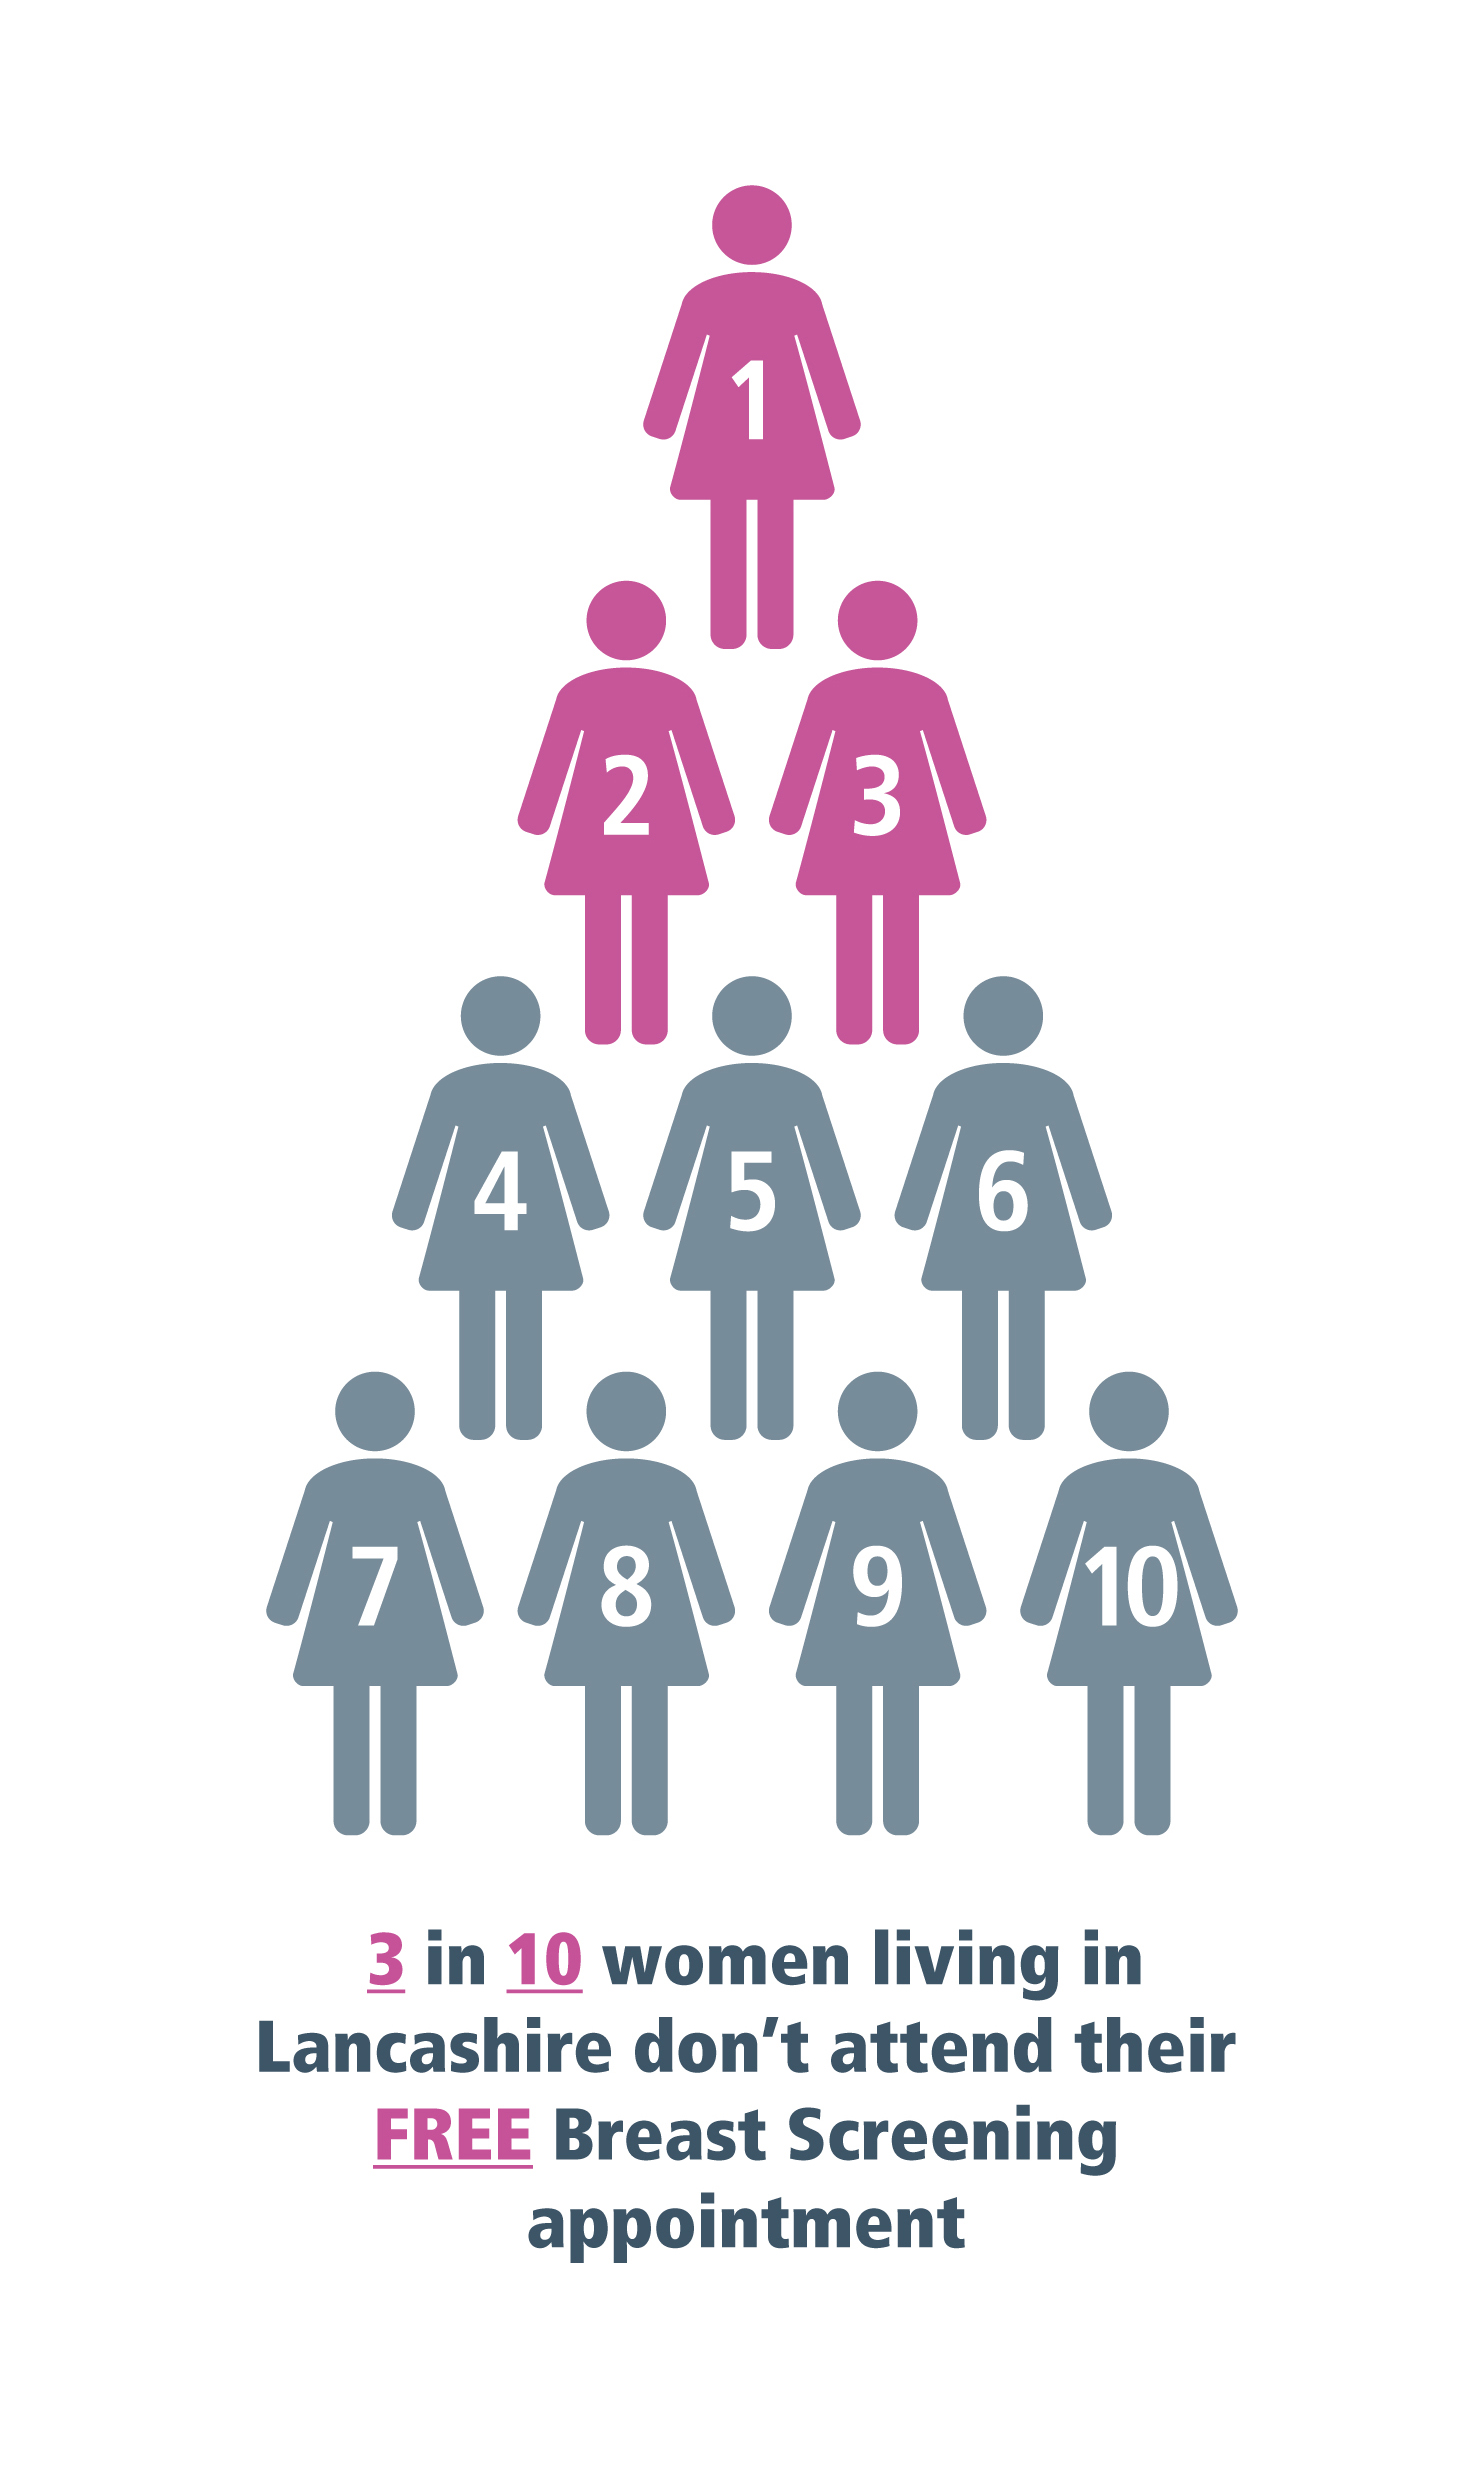 3 in 10 women living in Lancashire do not attend their free breast screening appointment